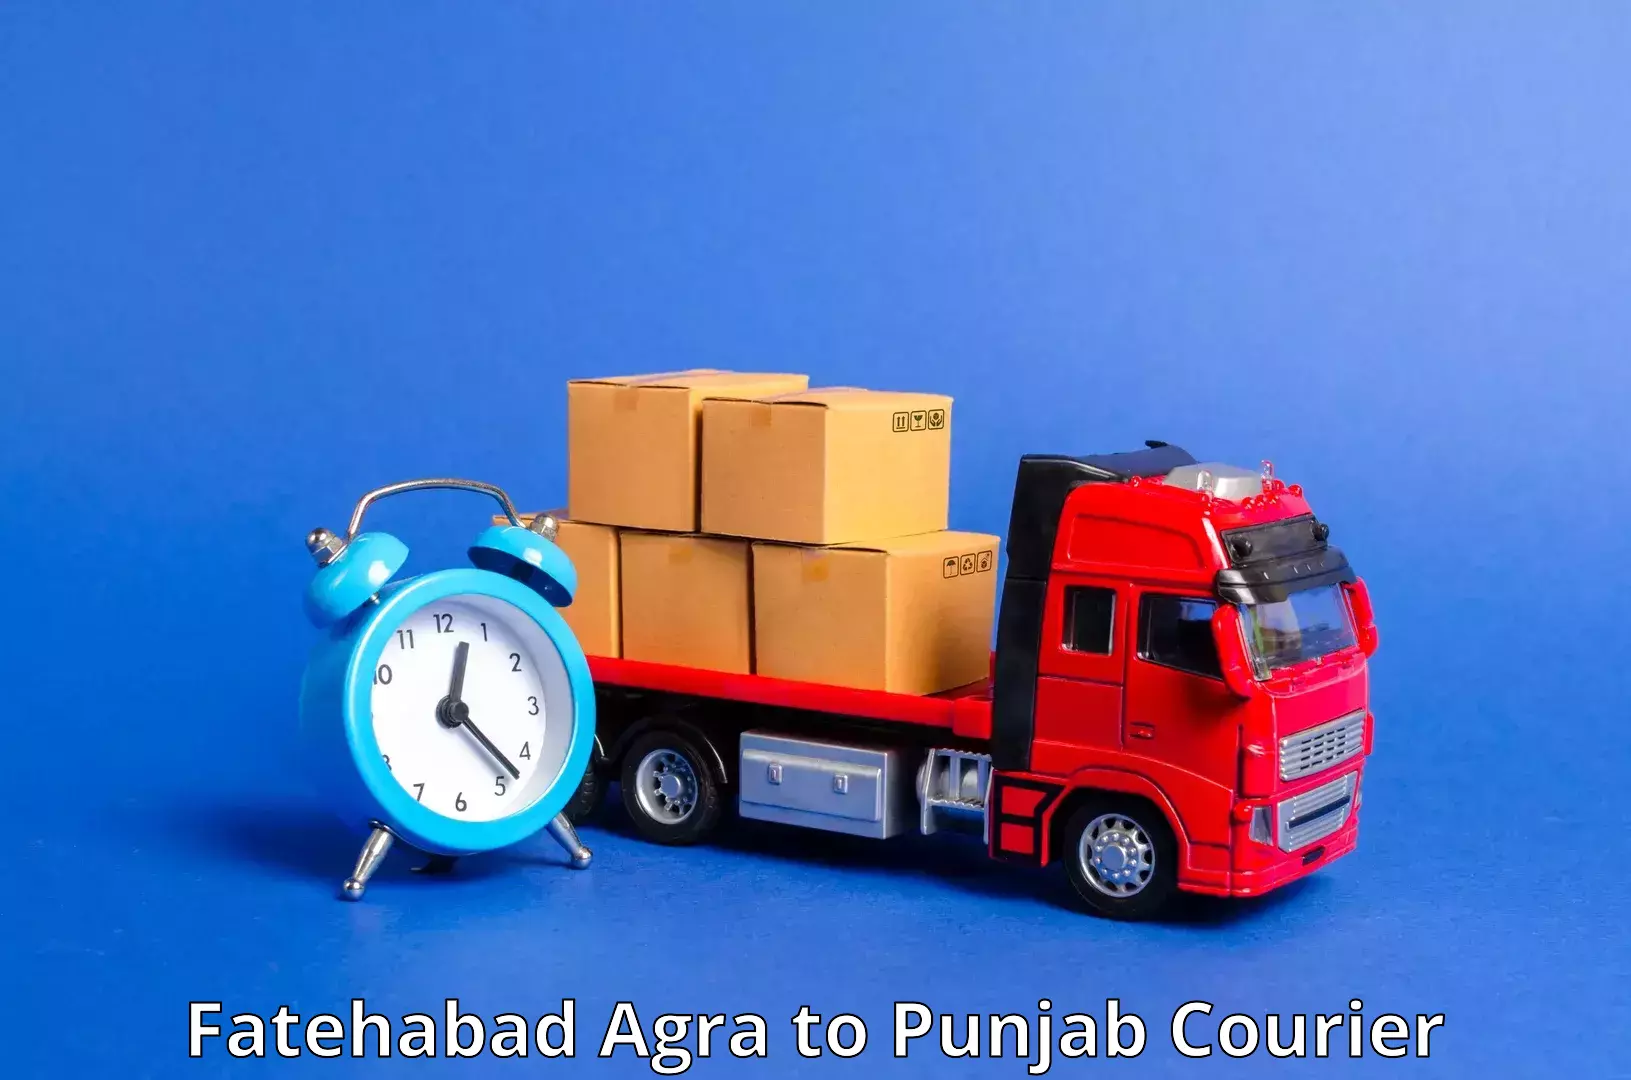 Courier service efficiency Fatehabad Agra to Zira